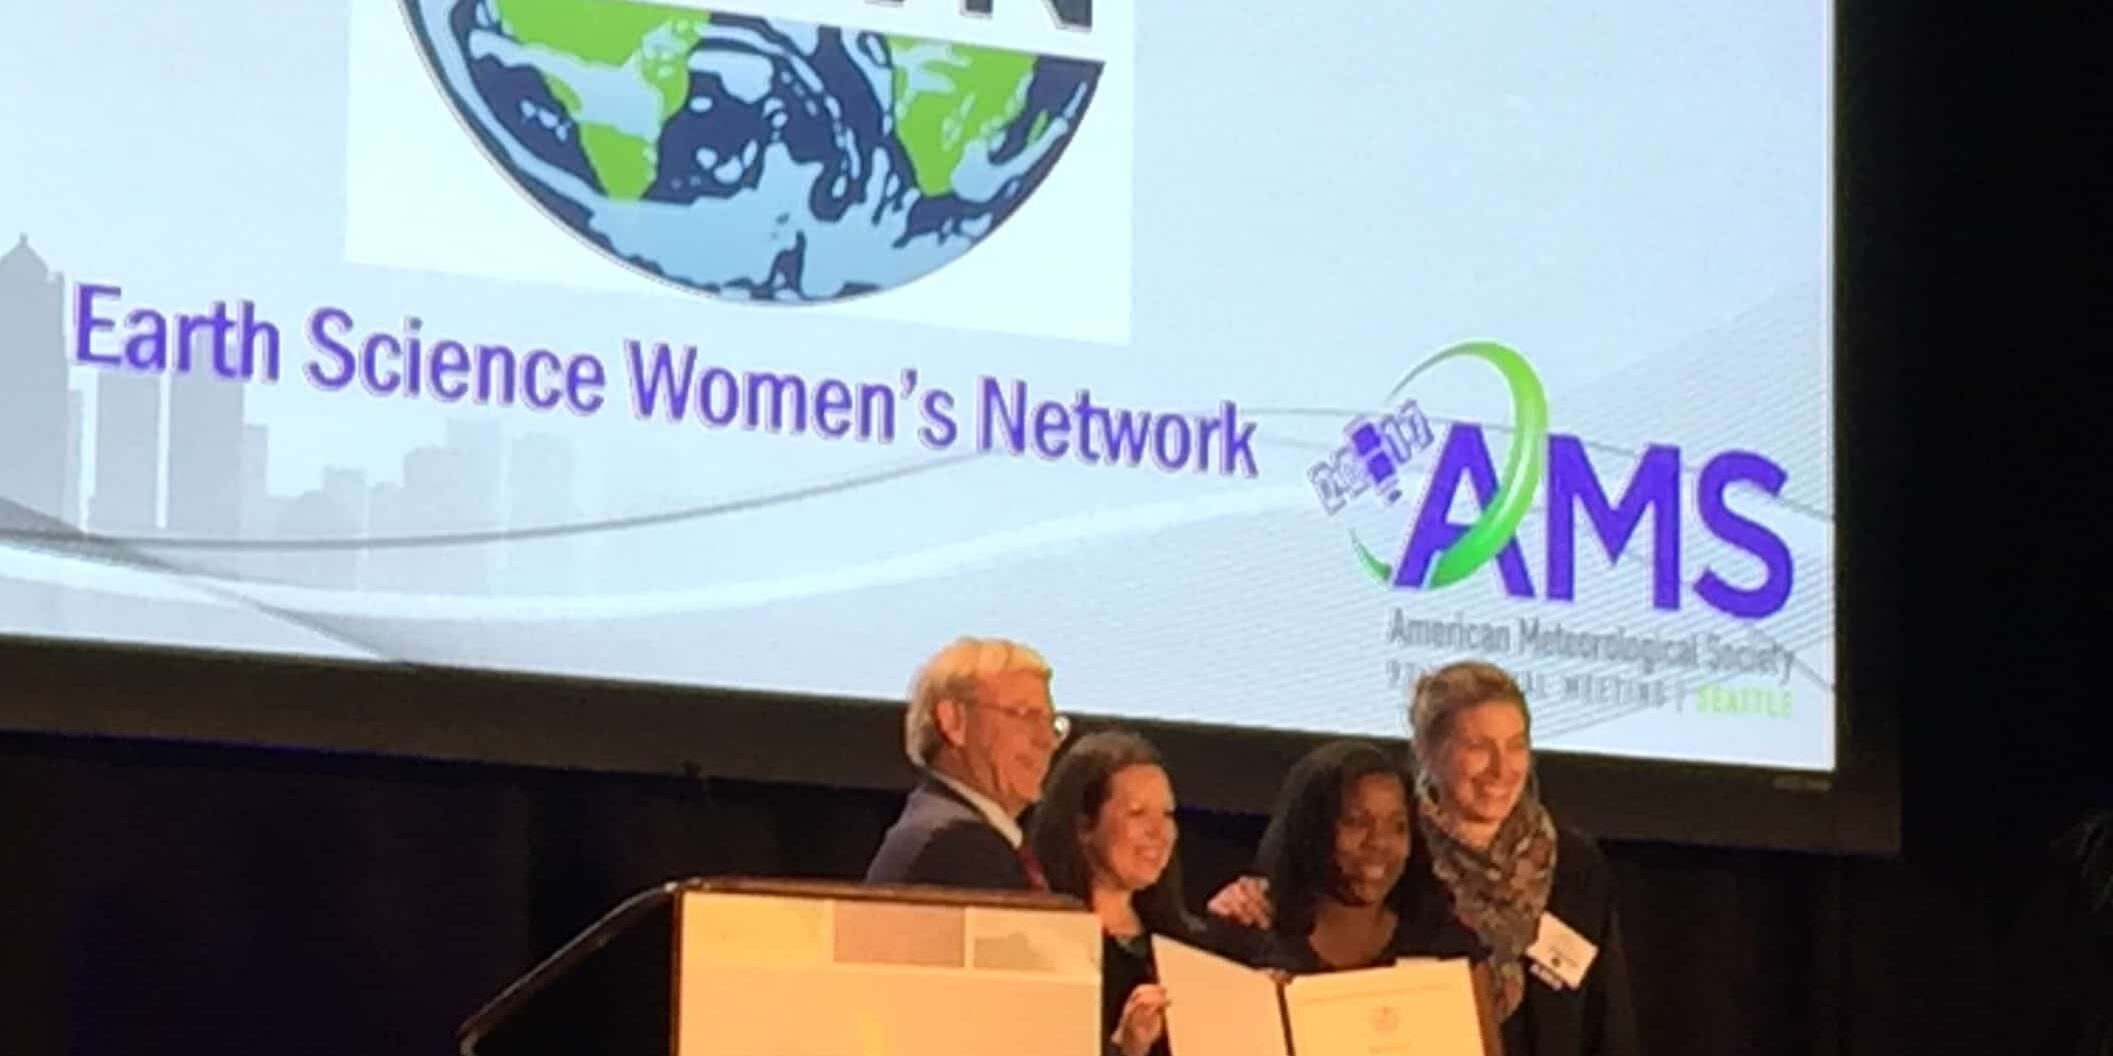 In January of 2017, the Earth Science Women’s Network received a special award from the American Meteorological Society for inspirational commitment to broadening the participation of women in the Earth sciences, providing a supportive environment for peer mentoring, and professional development. ESWN’s activities “have been shown to remove feelings of isolation and help women in the geosciences overcome barriers to professional advancement.” Thank you to the American Meteorological Society!